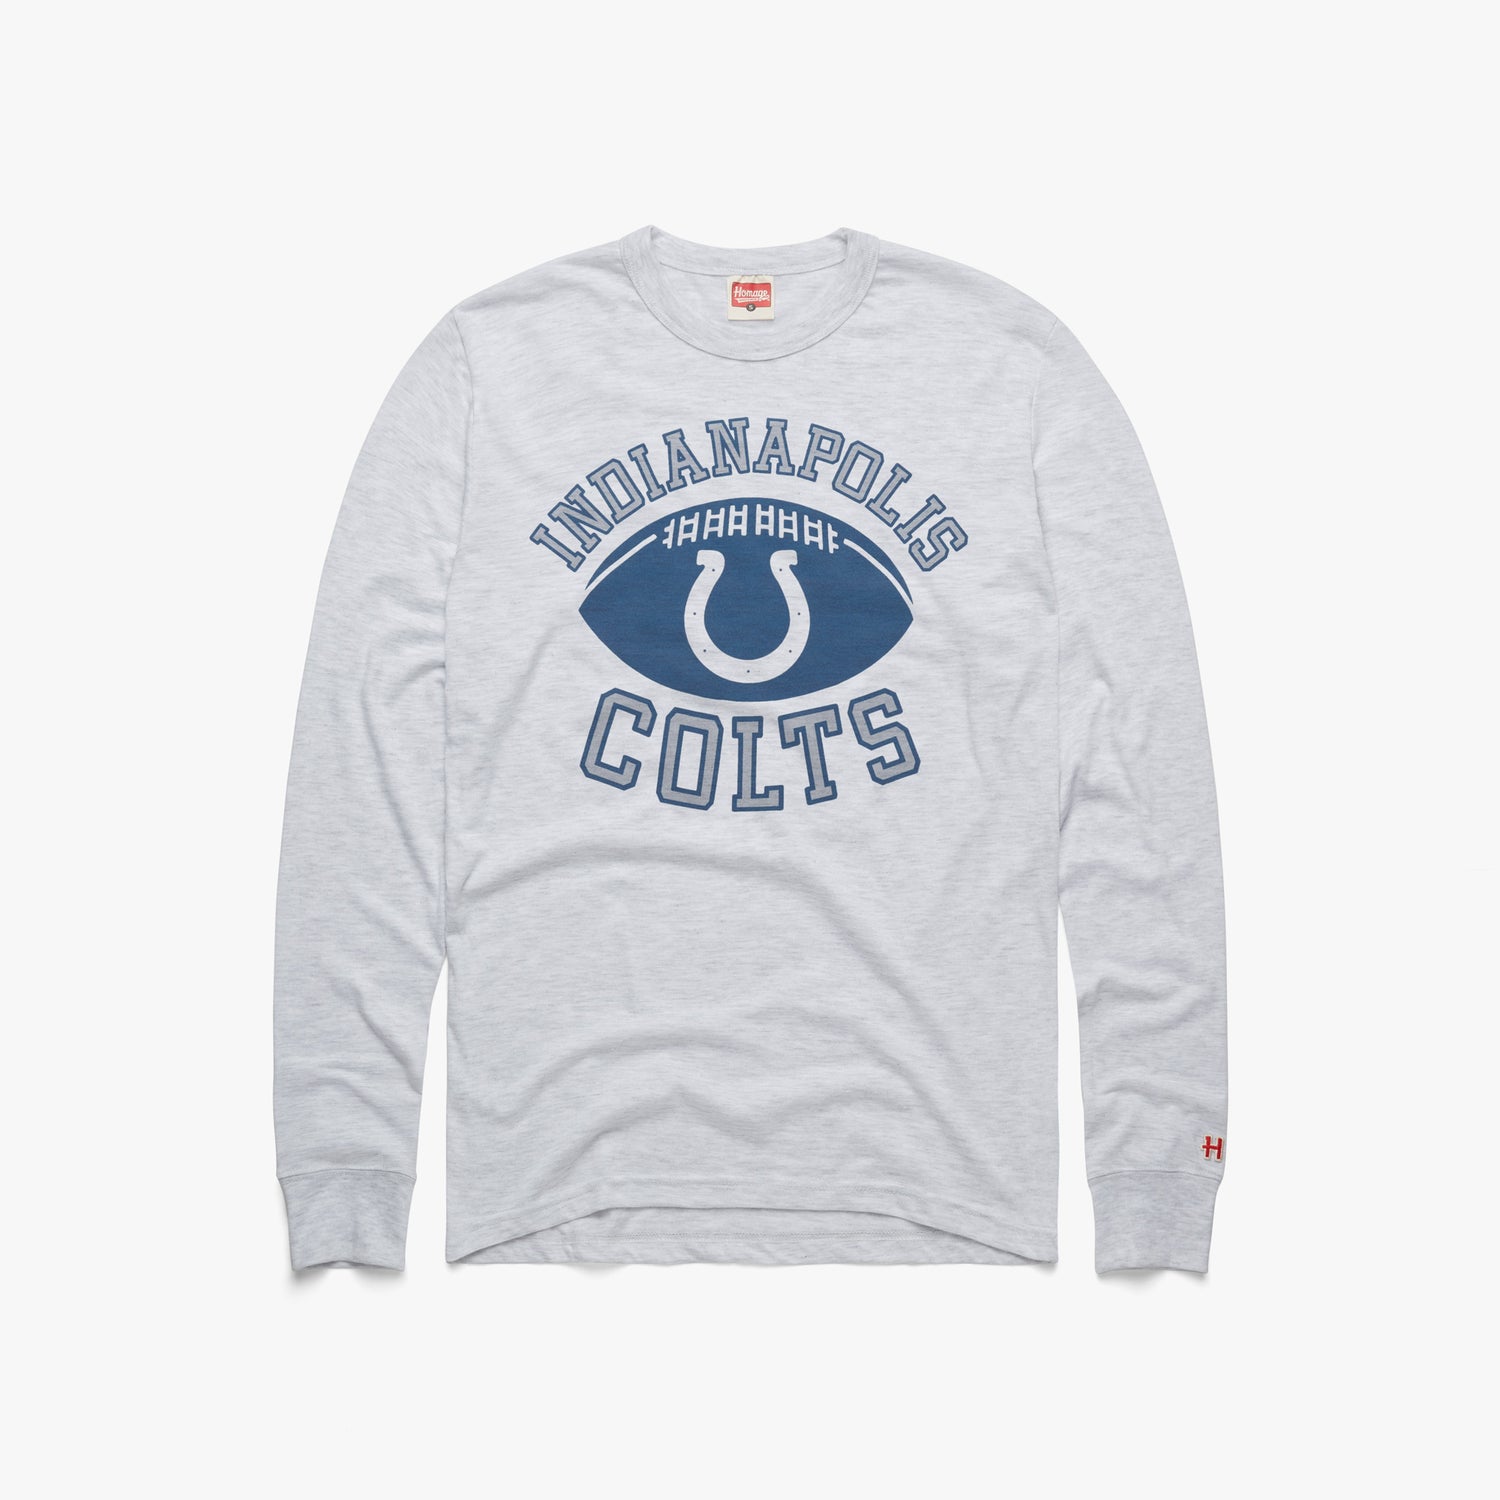 Indianapolis Colts Pigskin Long Sleeve Tee from Homage. | Officially Licensed Vintage NFL Apparel from Homage Pro Shop.